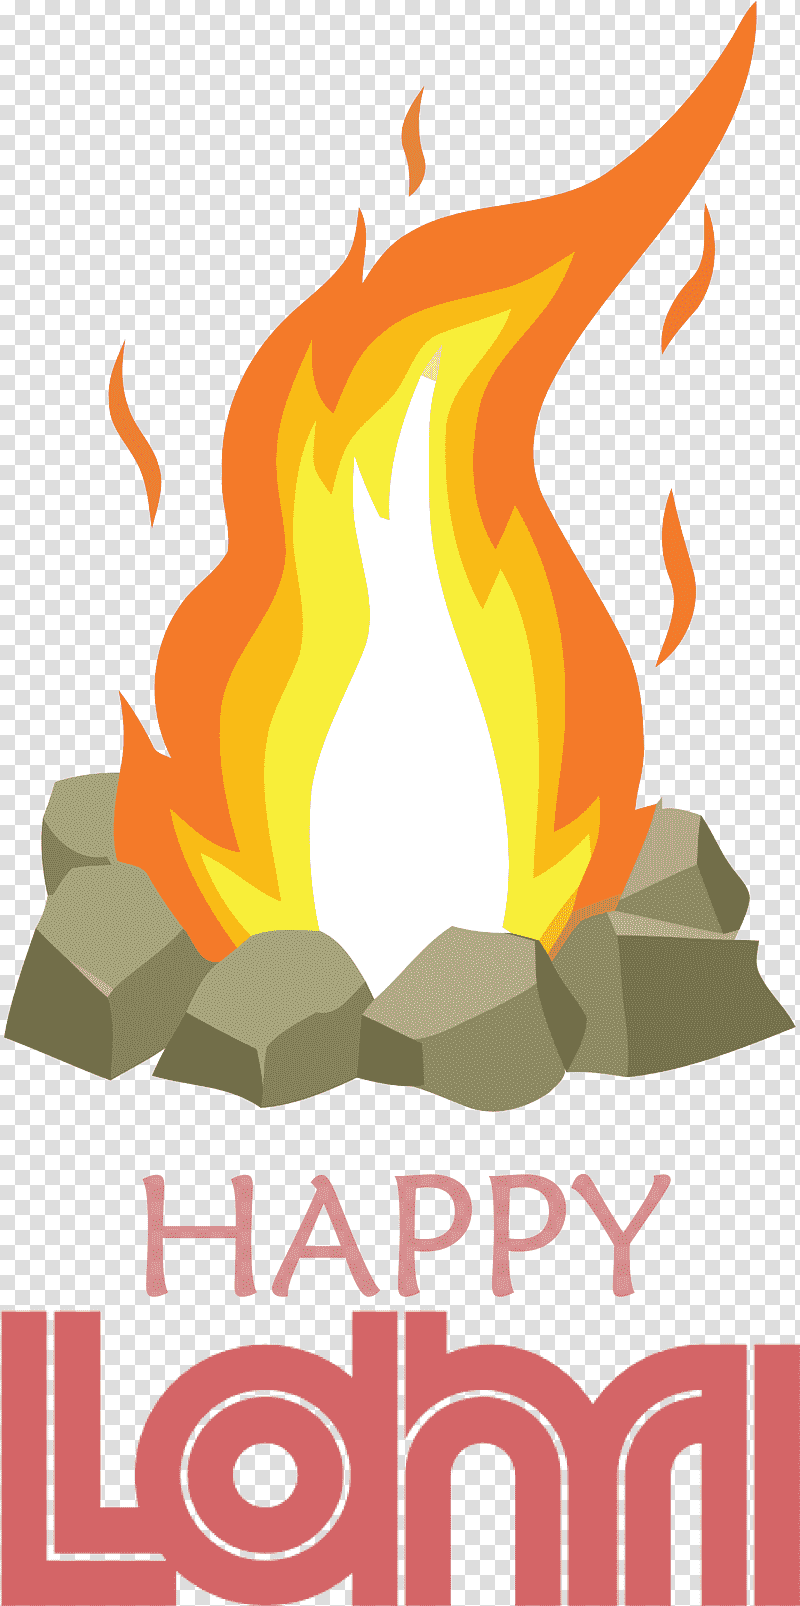 Happy Lohri, Campfire, Wildfire, Bonfire, Cartoon, Camping, Drawing transparent background PNG clipart